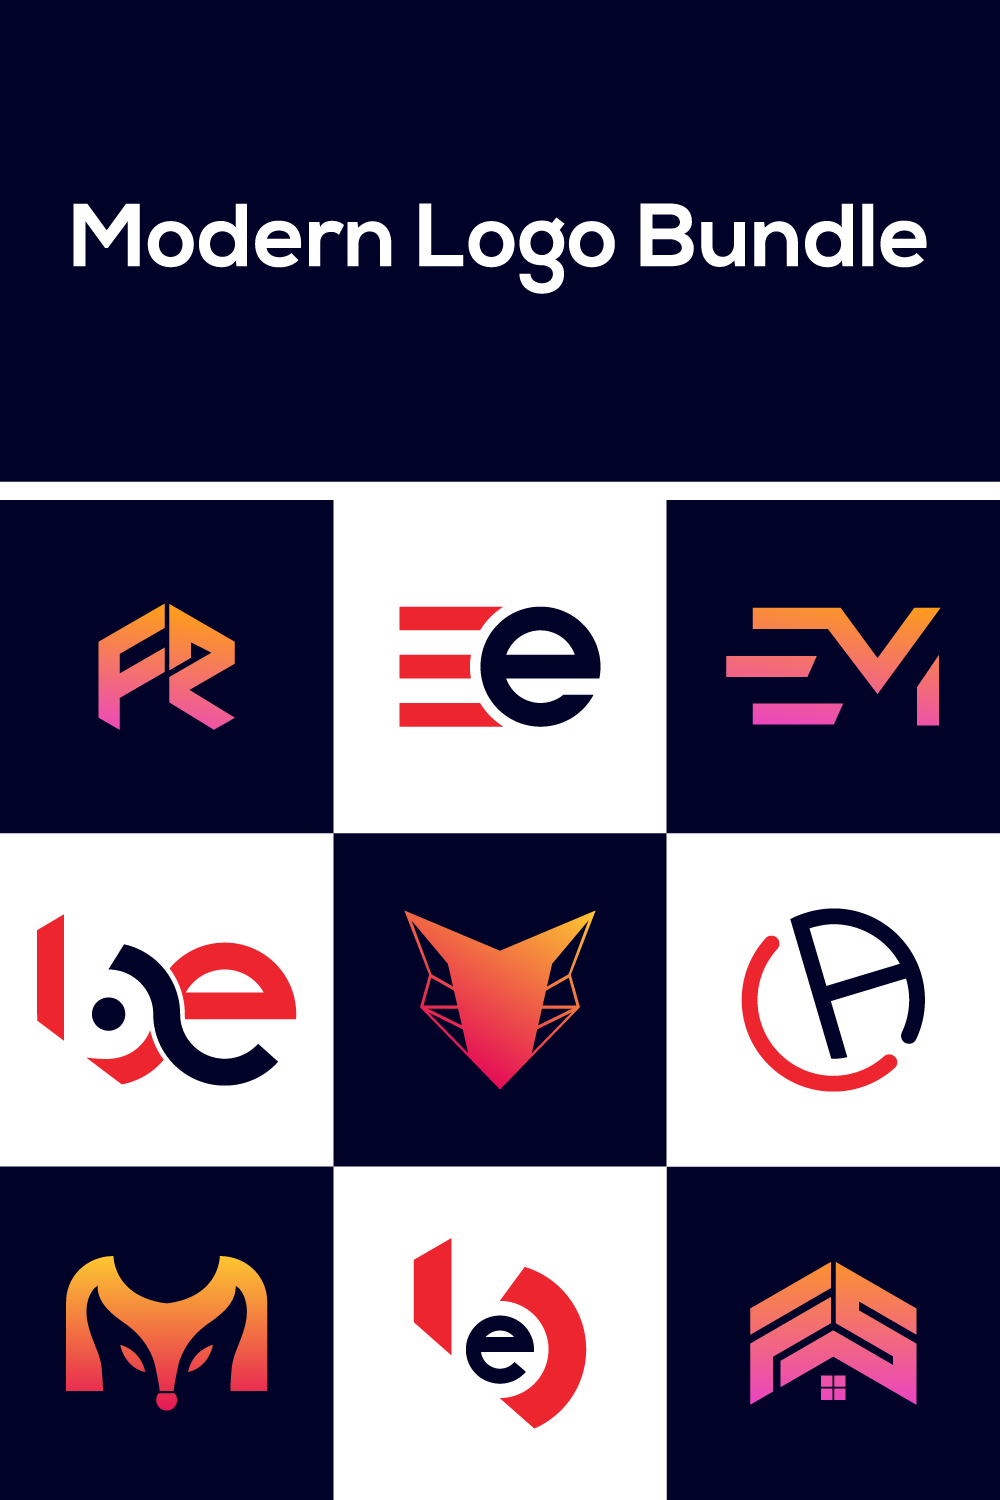 Set of images with exquisite logos in orange colors.